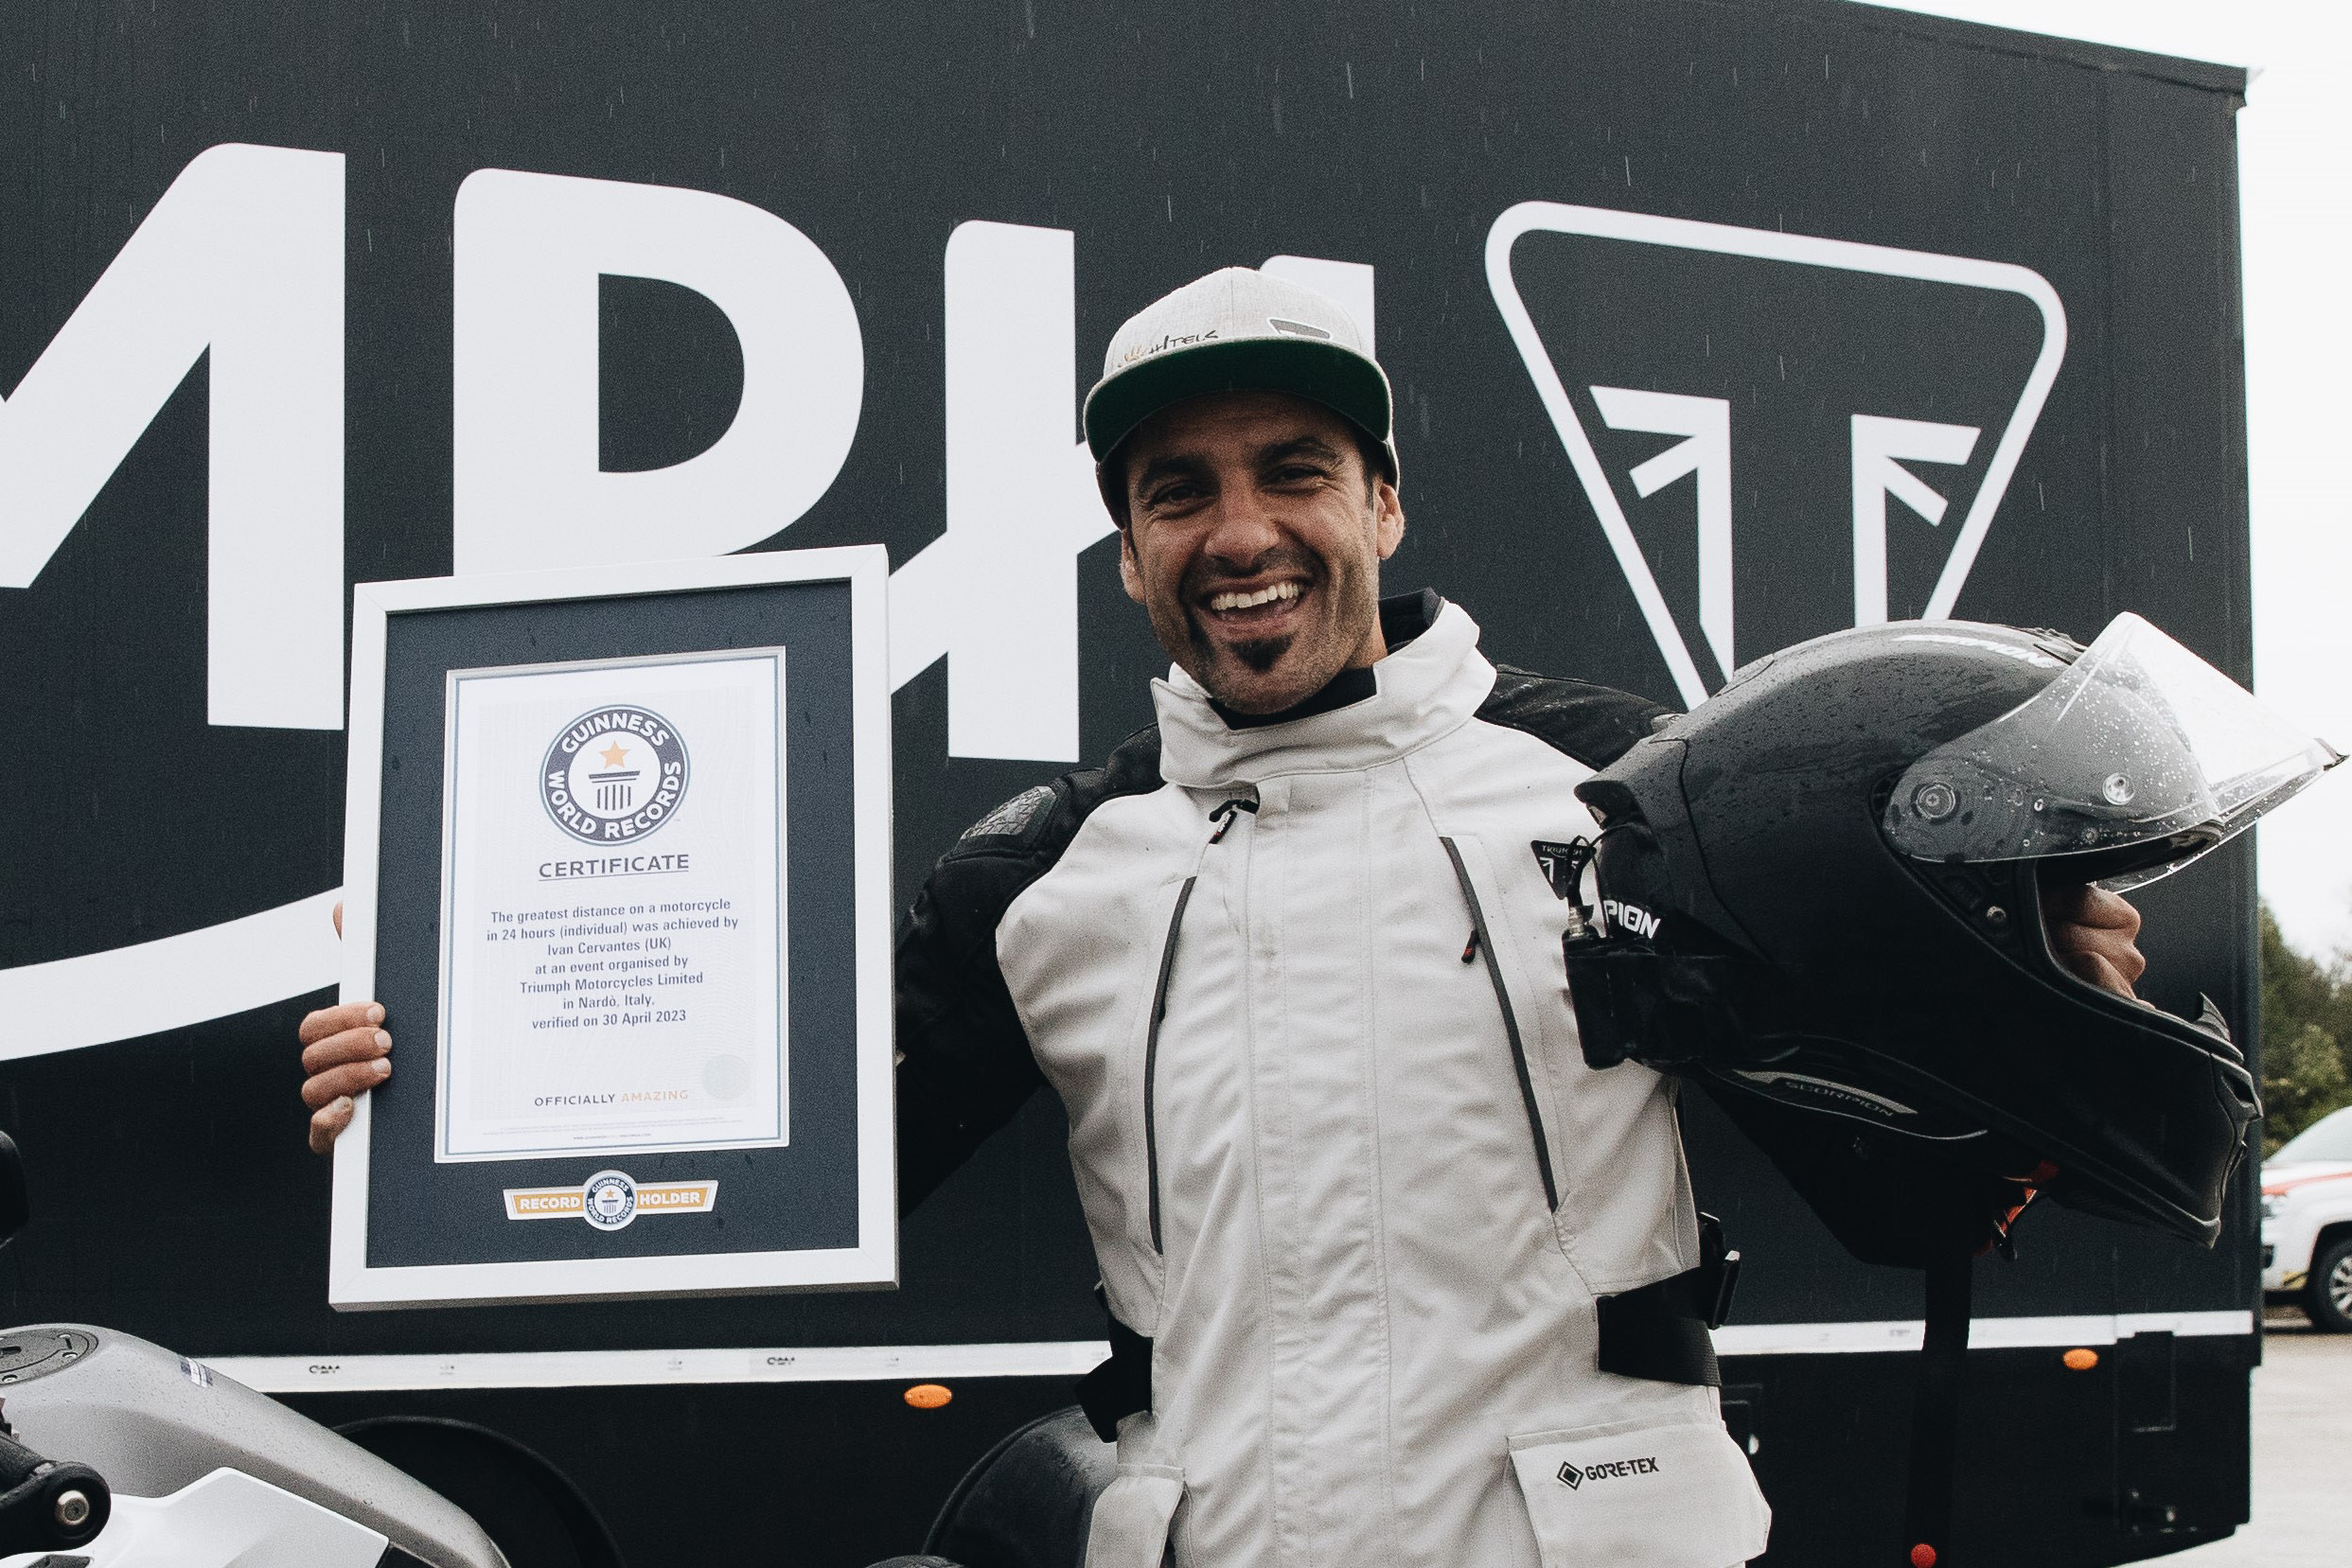 IVÁN CERVANTES CLAIMS GUINNESS WORLD RECORDS TITLE FOR  THE GREATEST DISTANCE ON A MOTORCYCLE IN 24 HOURS  WITH A TIGER 1200 GT EXPLORER